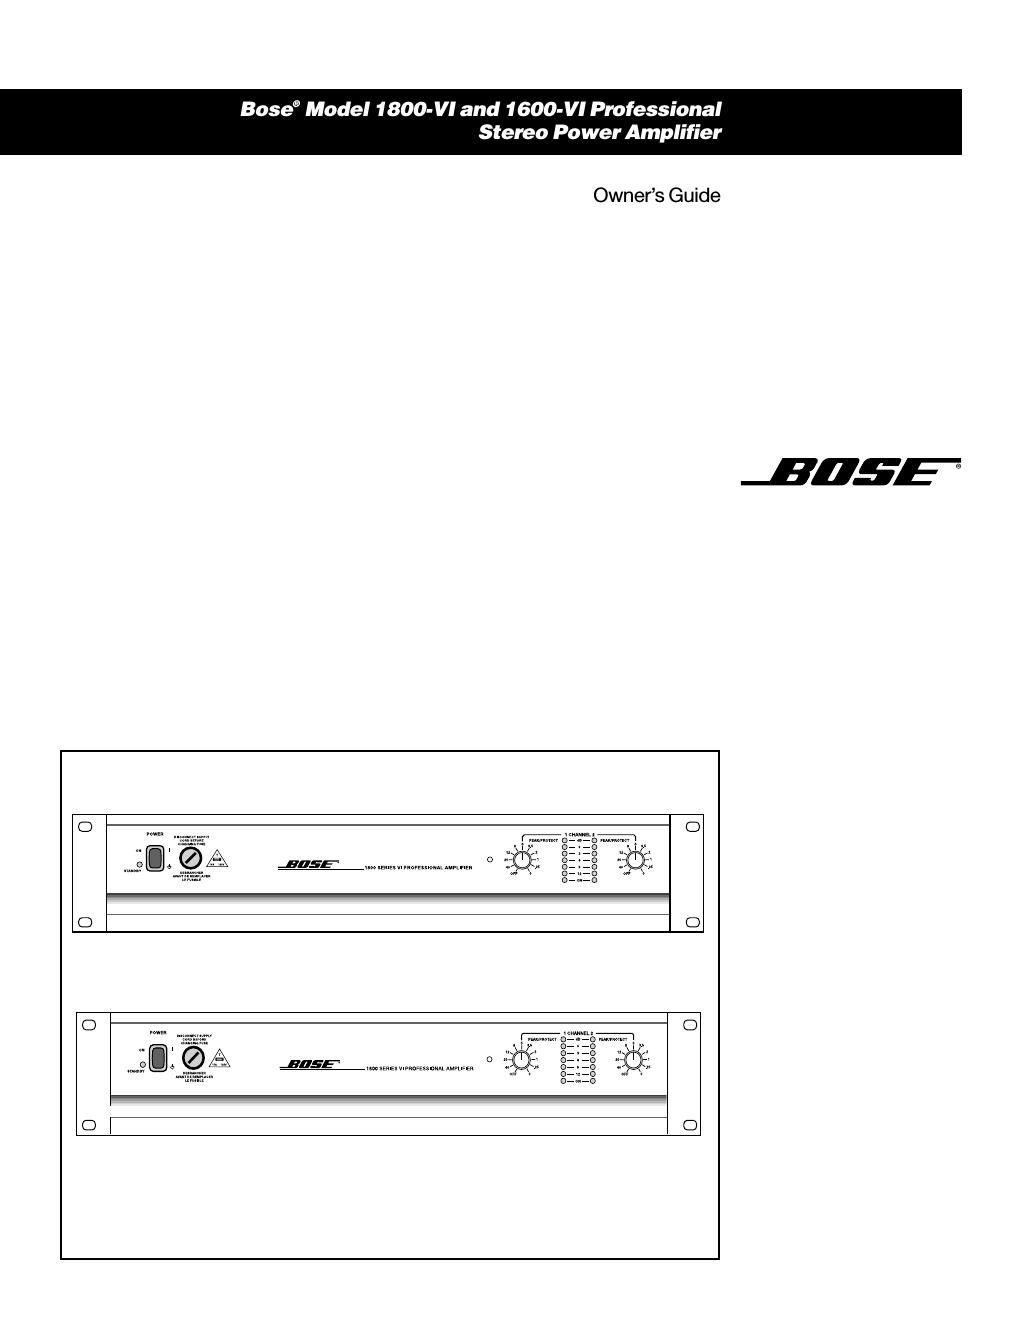 bose 1800 vi owners guide